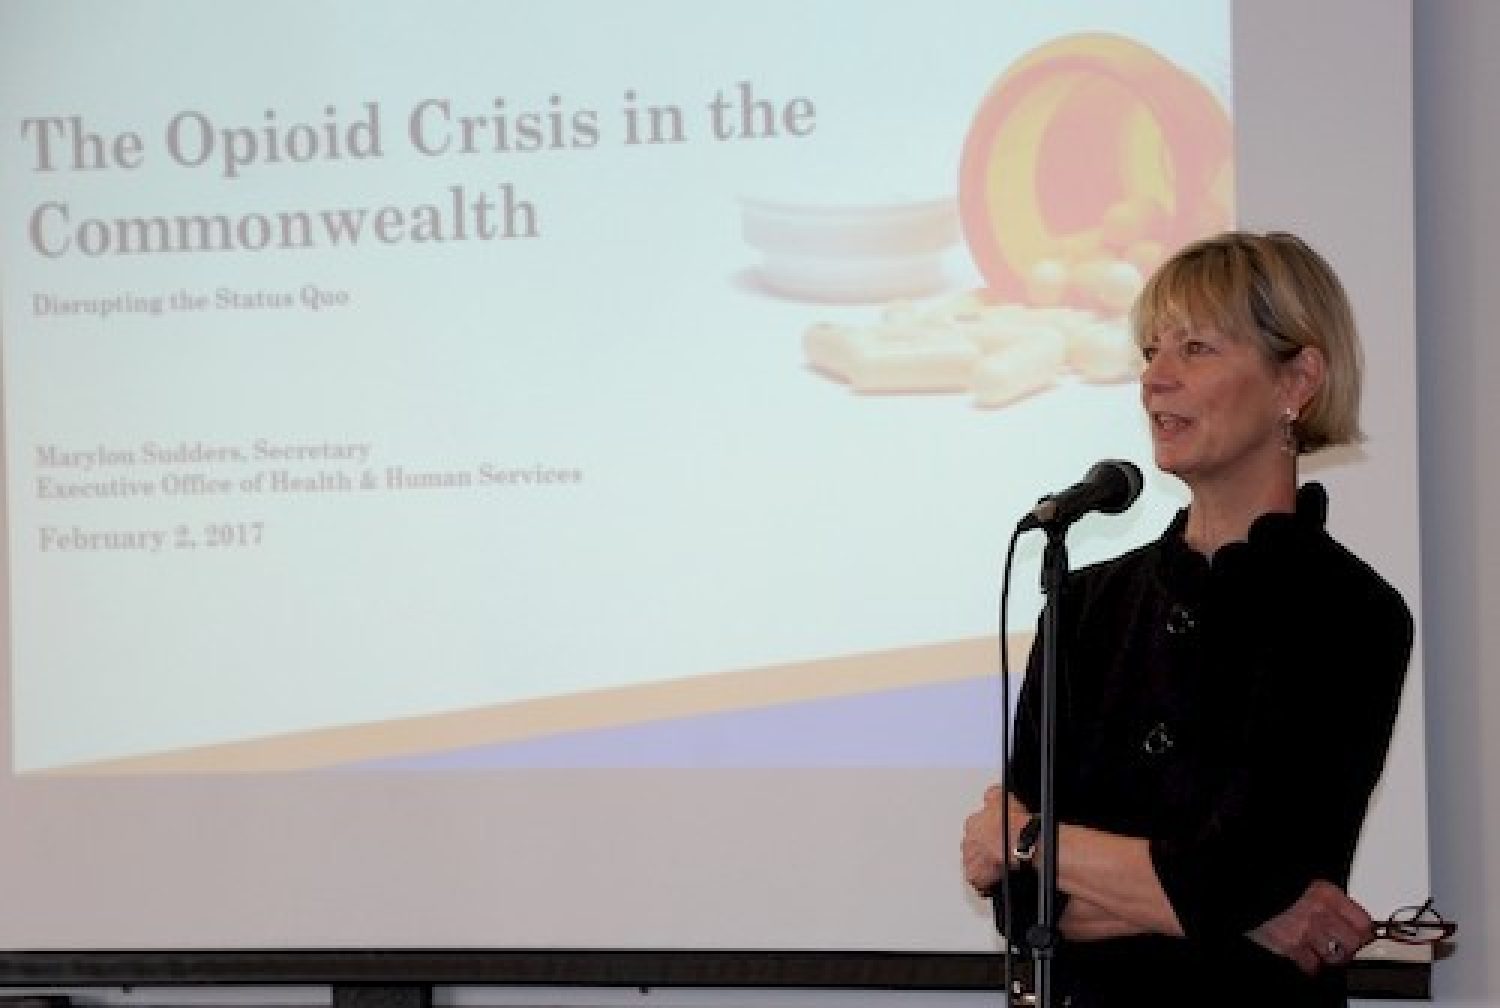 Marylou Sudders speaks to Boston College Social Work students, faculty, and staff on February 2, 2017.